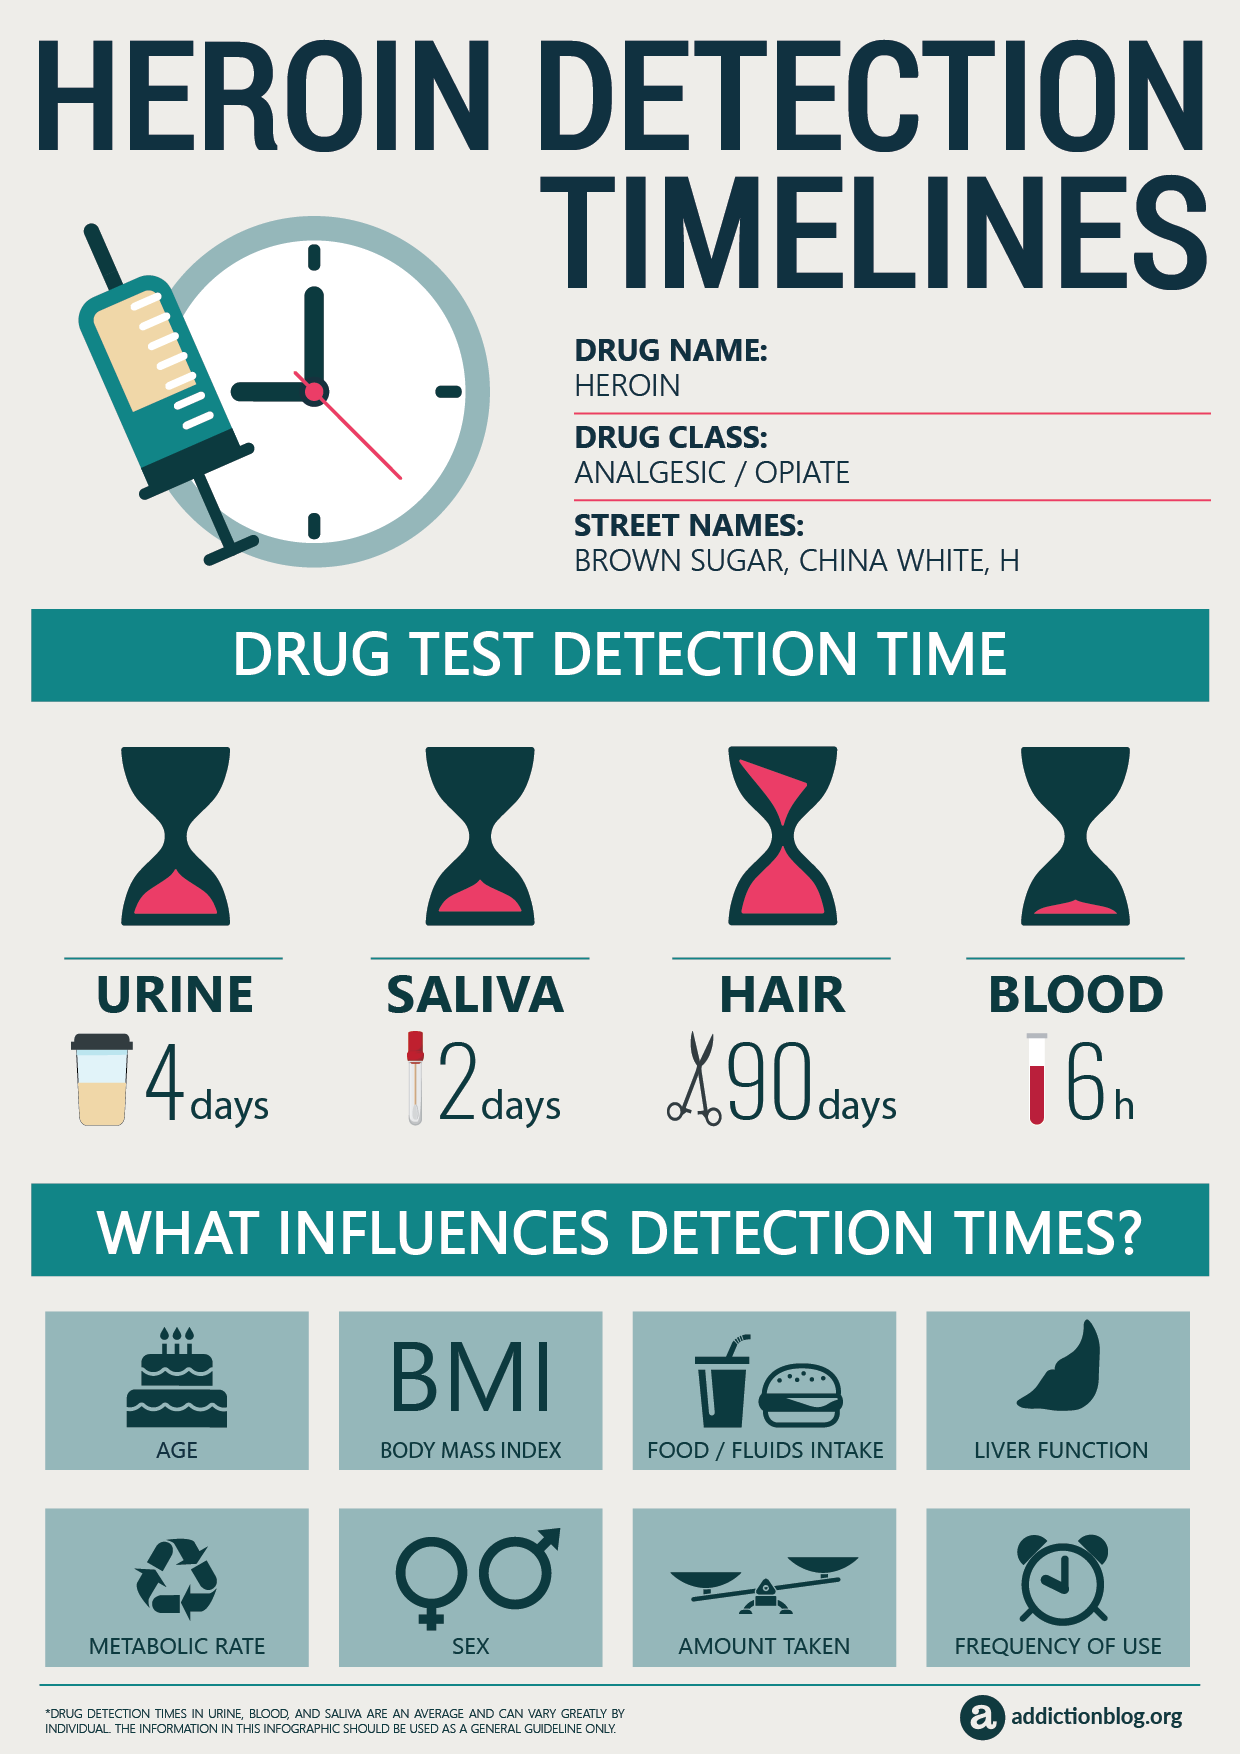 Heroin Detection Timeline [INFOGRAPHIC]